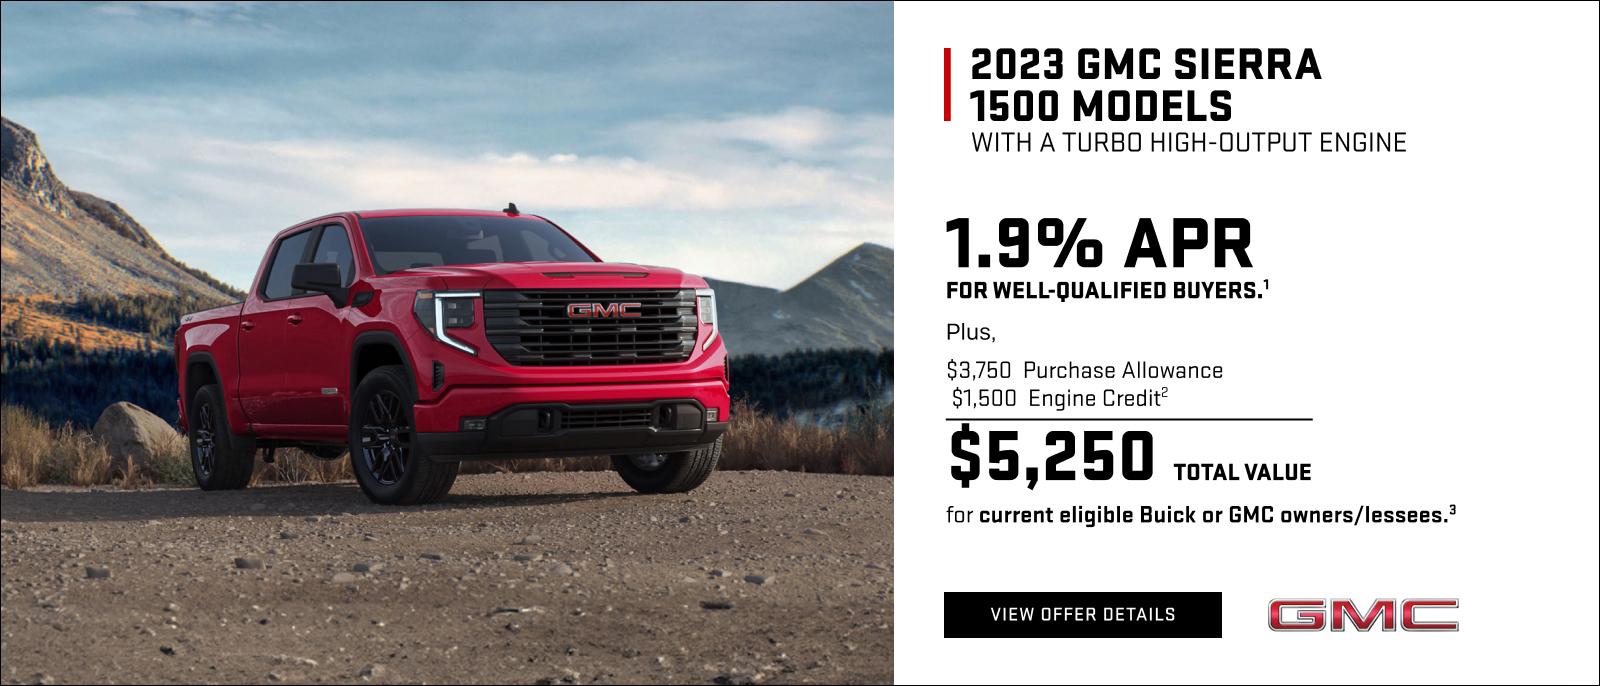 1.9% APR for well-qualified buyers.1

Plus

$3,750 Purchase Allowance
$1,500 Engine Credit2
$5,250 Total Value for current eligible Buick or GMC owners/lessees.3